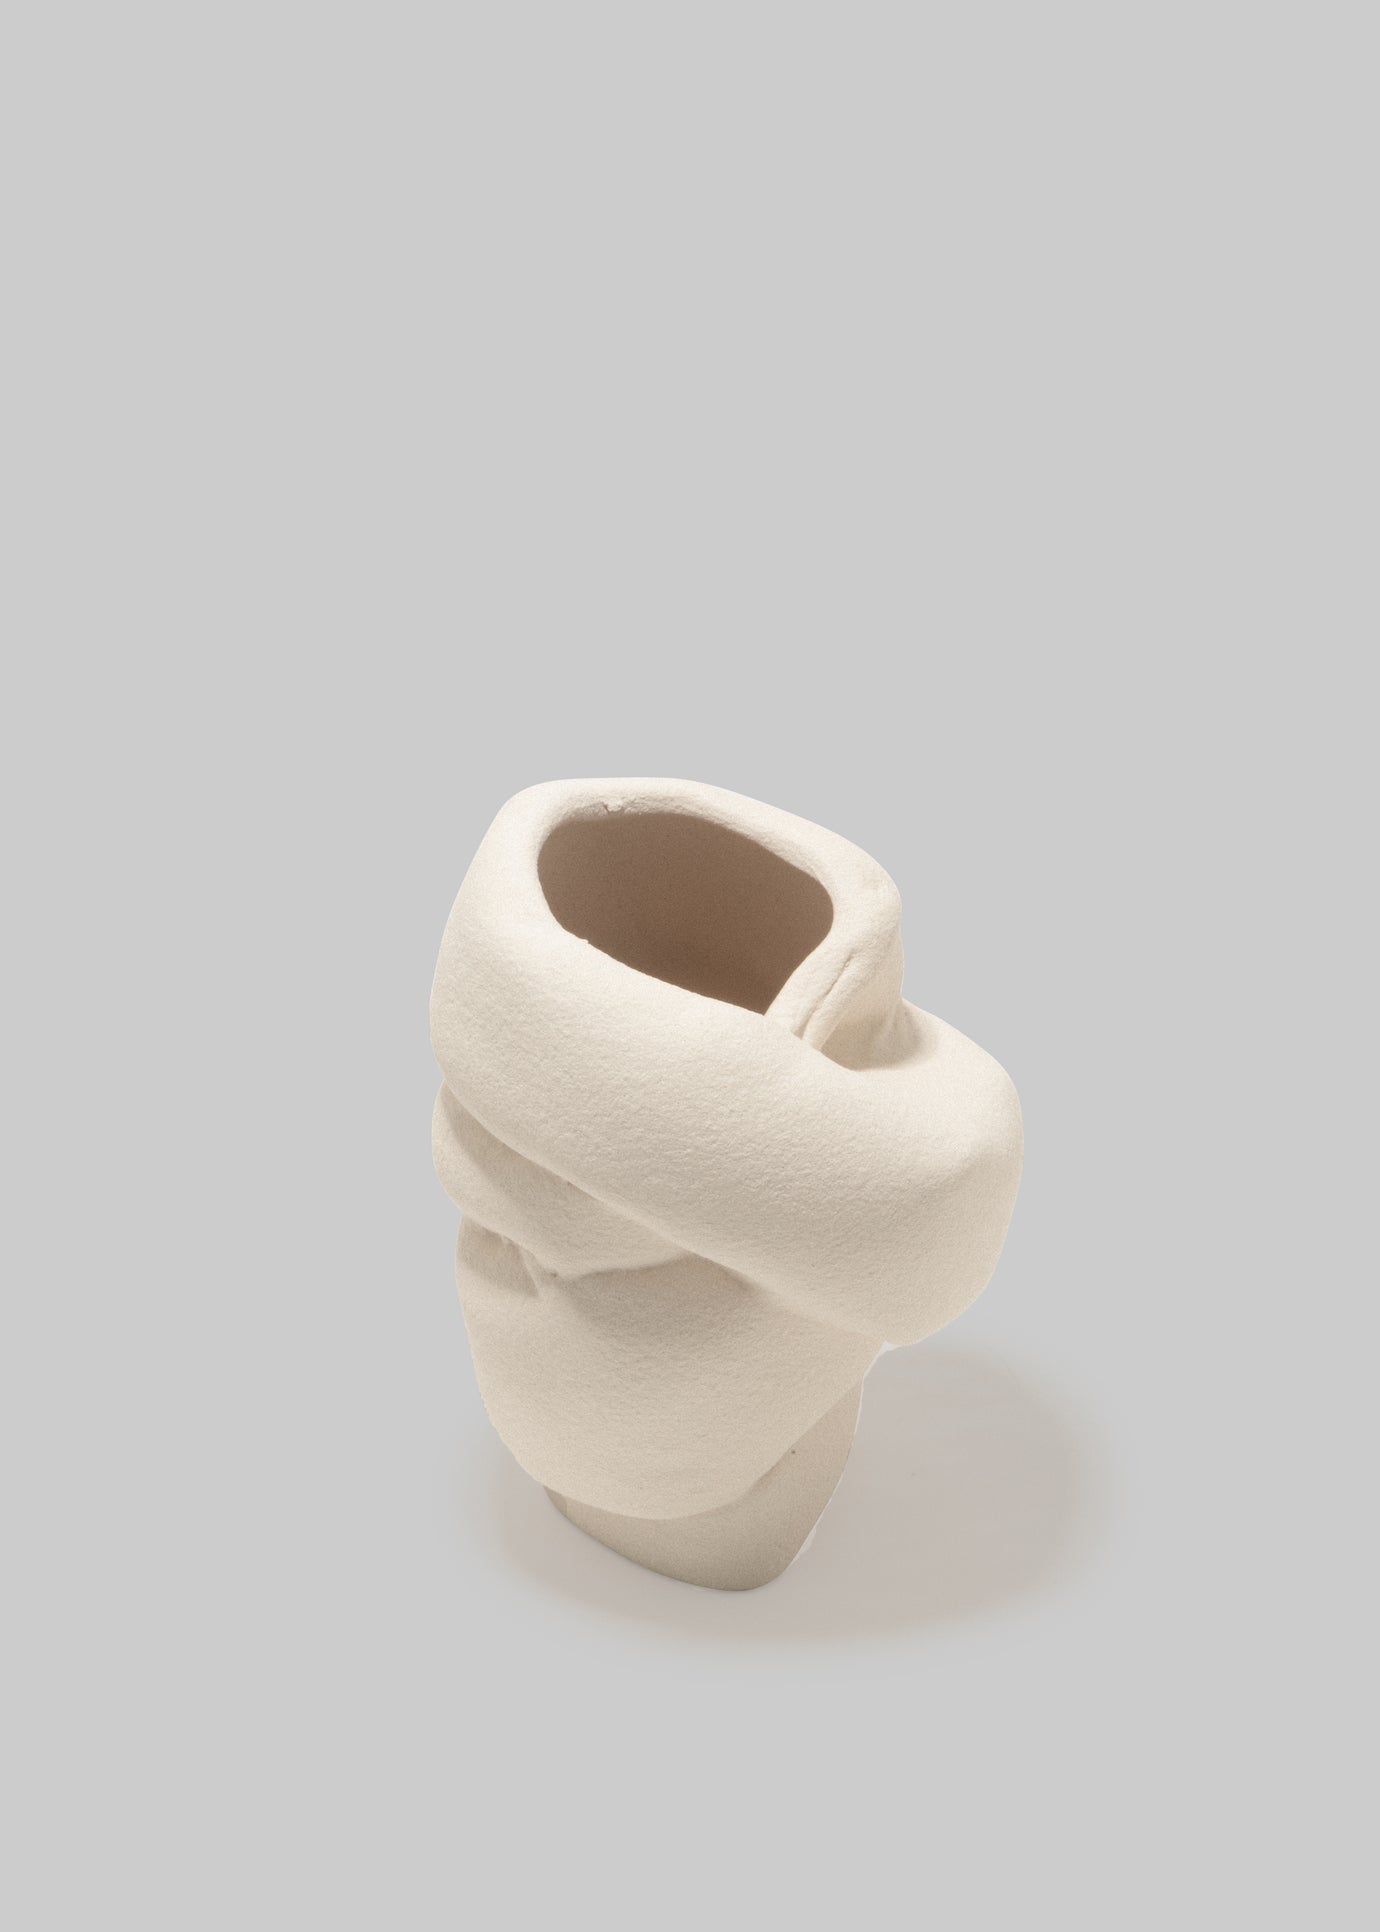 Completedworks Well Wrapped Small Vase - Textured Beige